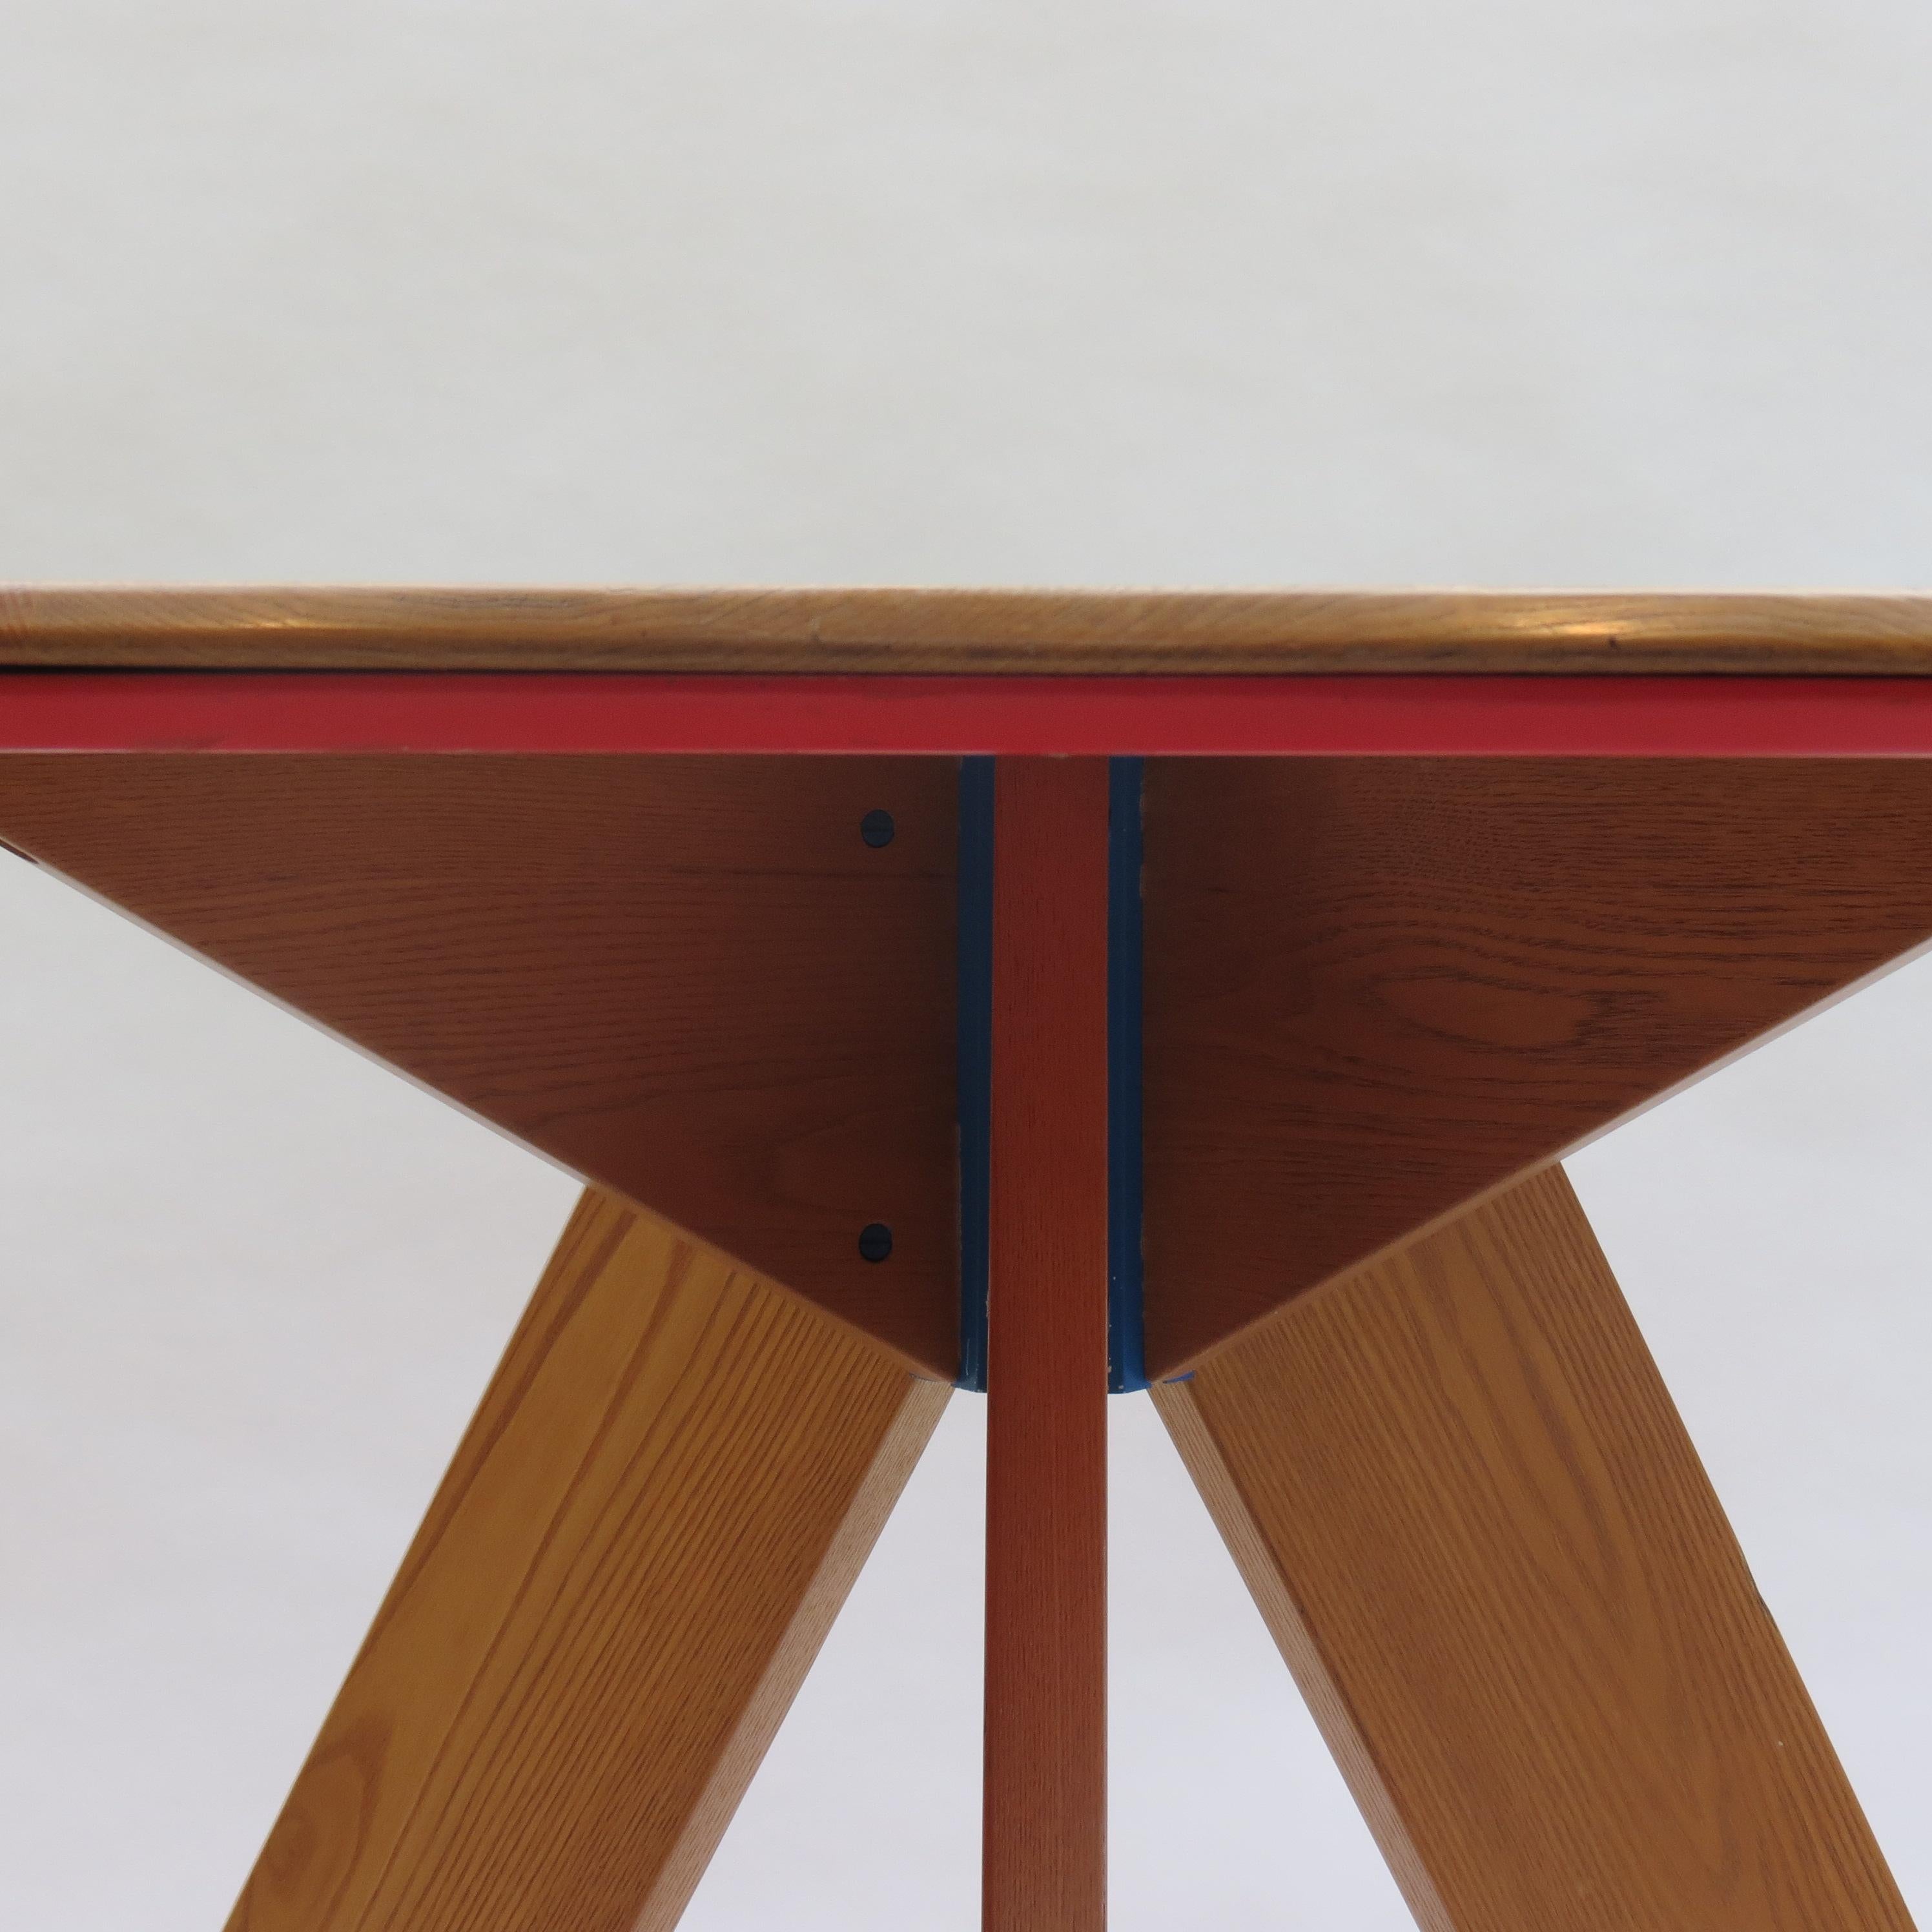 Mid-Century Modern Midcentury Bespoke Round Dining Table by David Field 1980s with Red and Blue Det